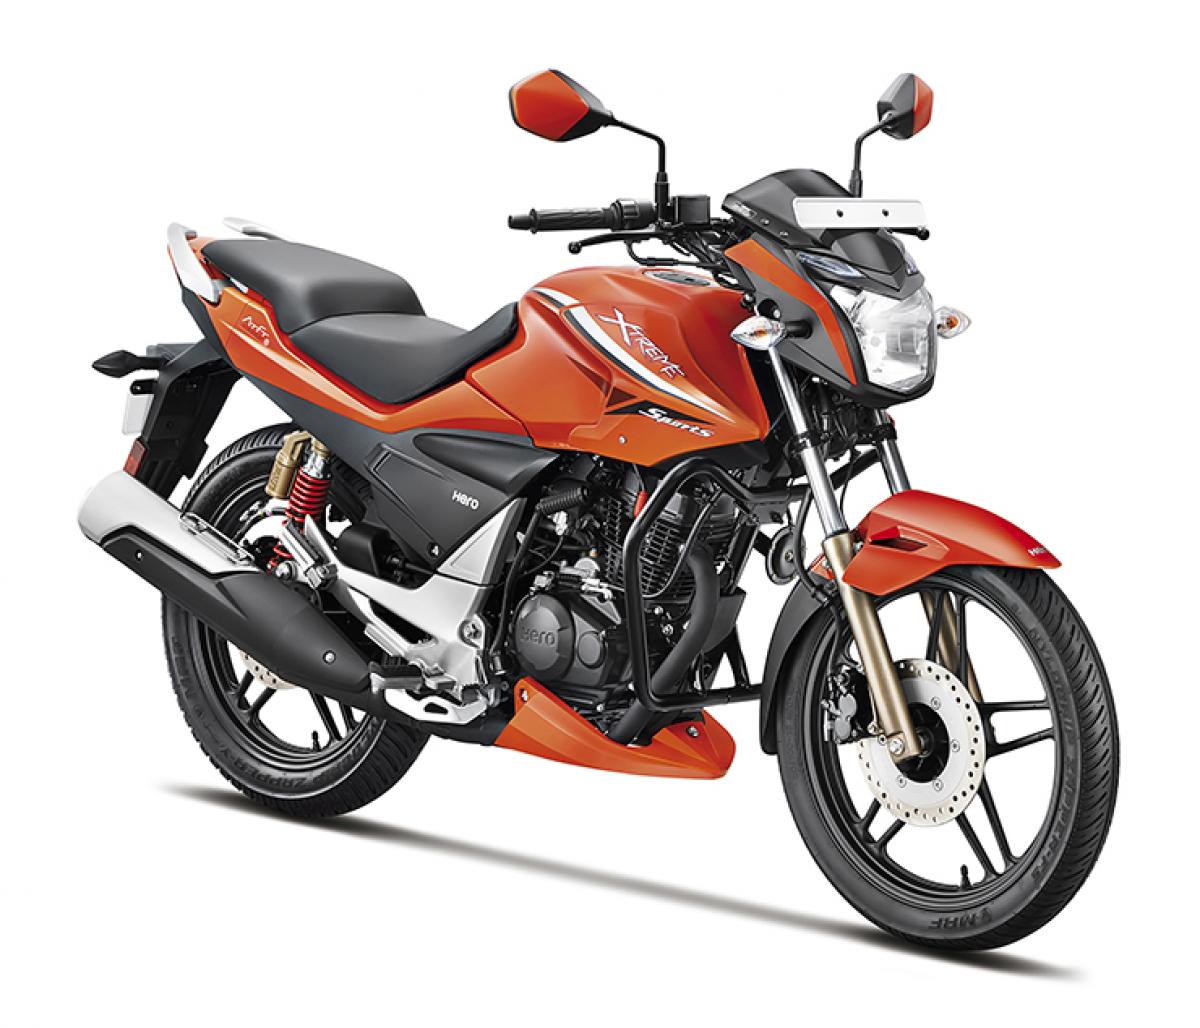 Hero MotoCorp launches new version of Xtreme Sports